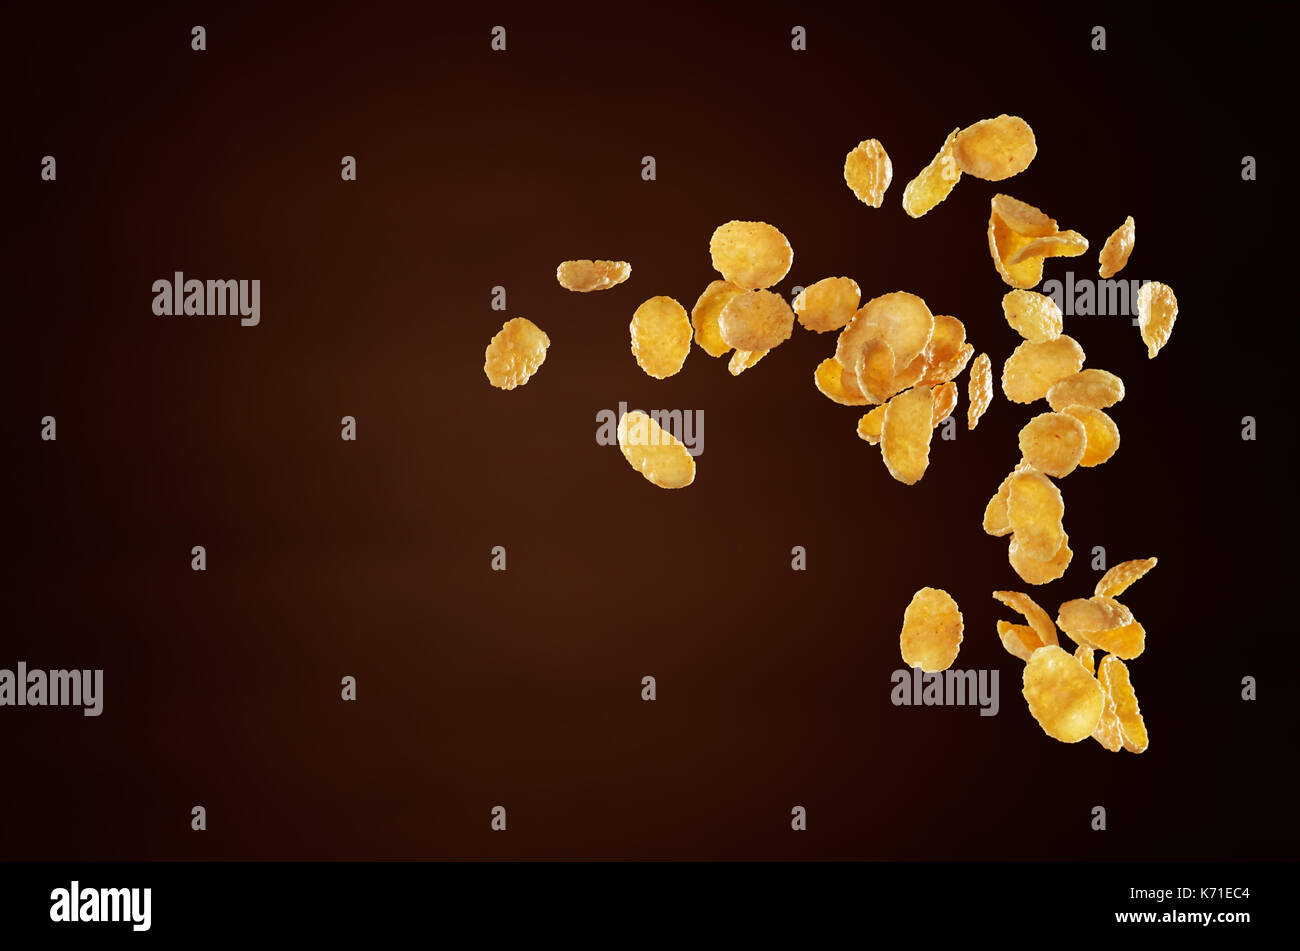 corn flakes flying isolated on brown background Stock Photo